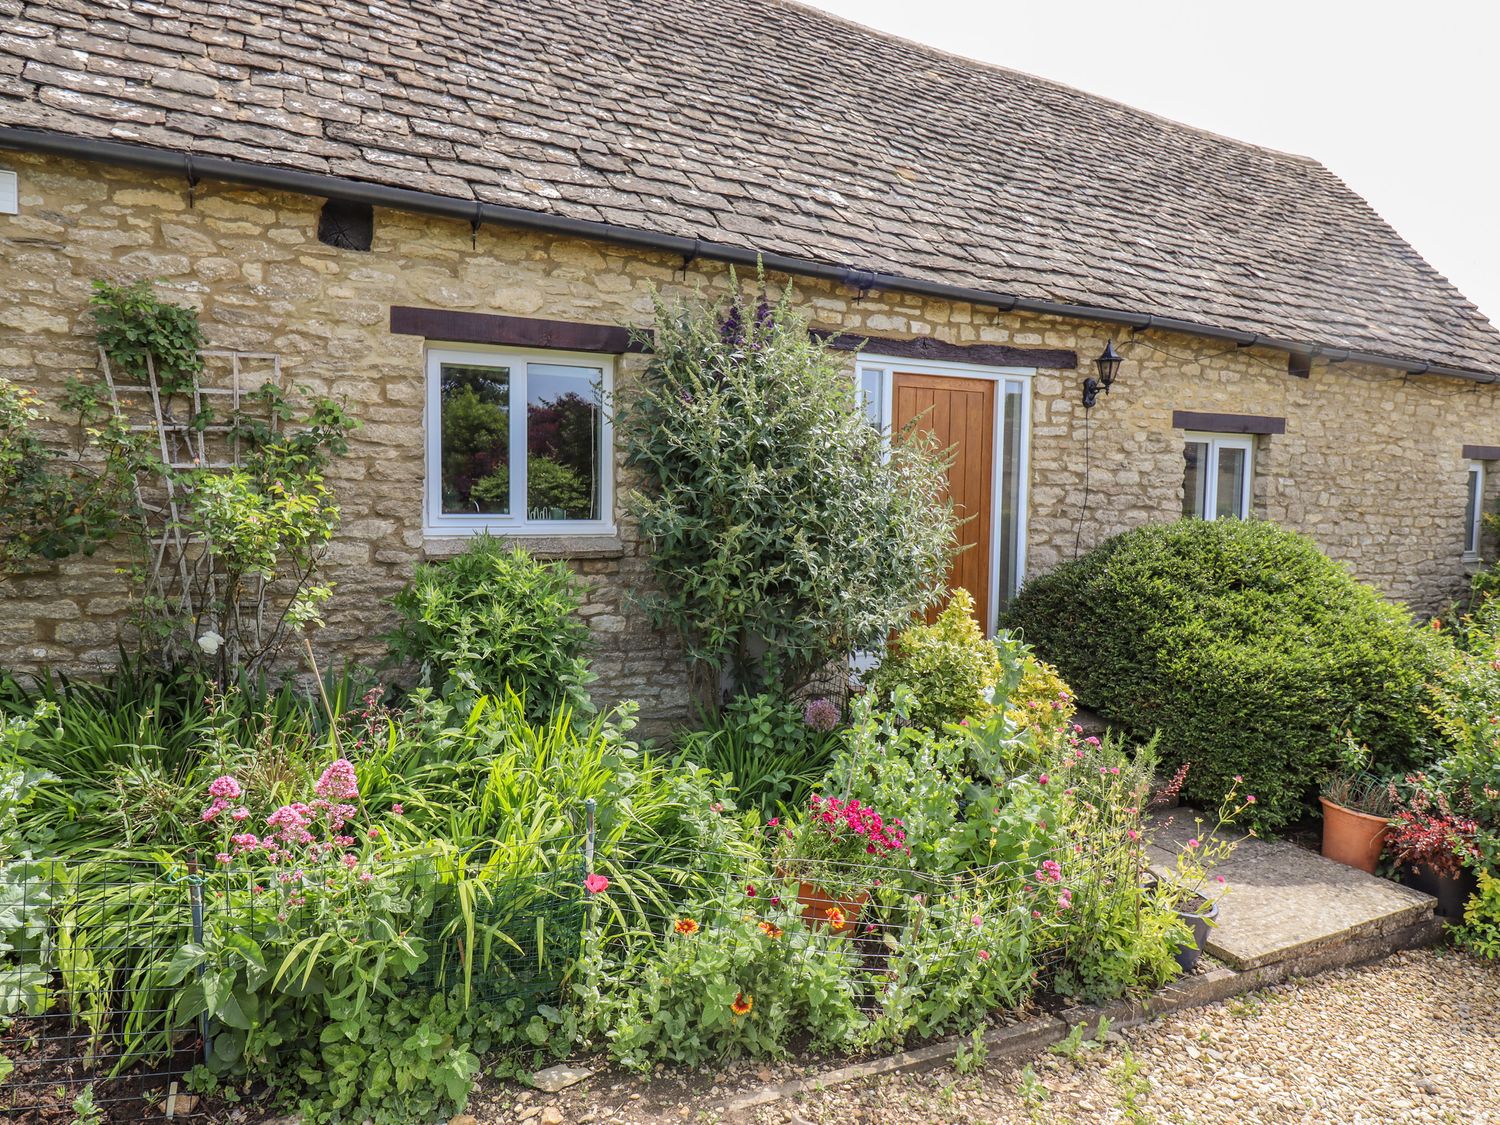 Oxfordshire Holiday Cottages: Pheasant Cottage, Minster Lovell | sykescottages.co.uk